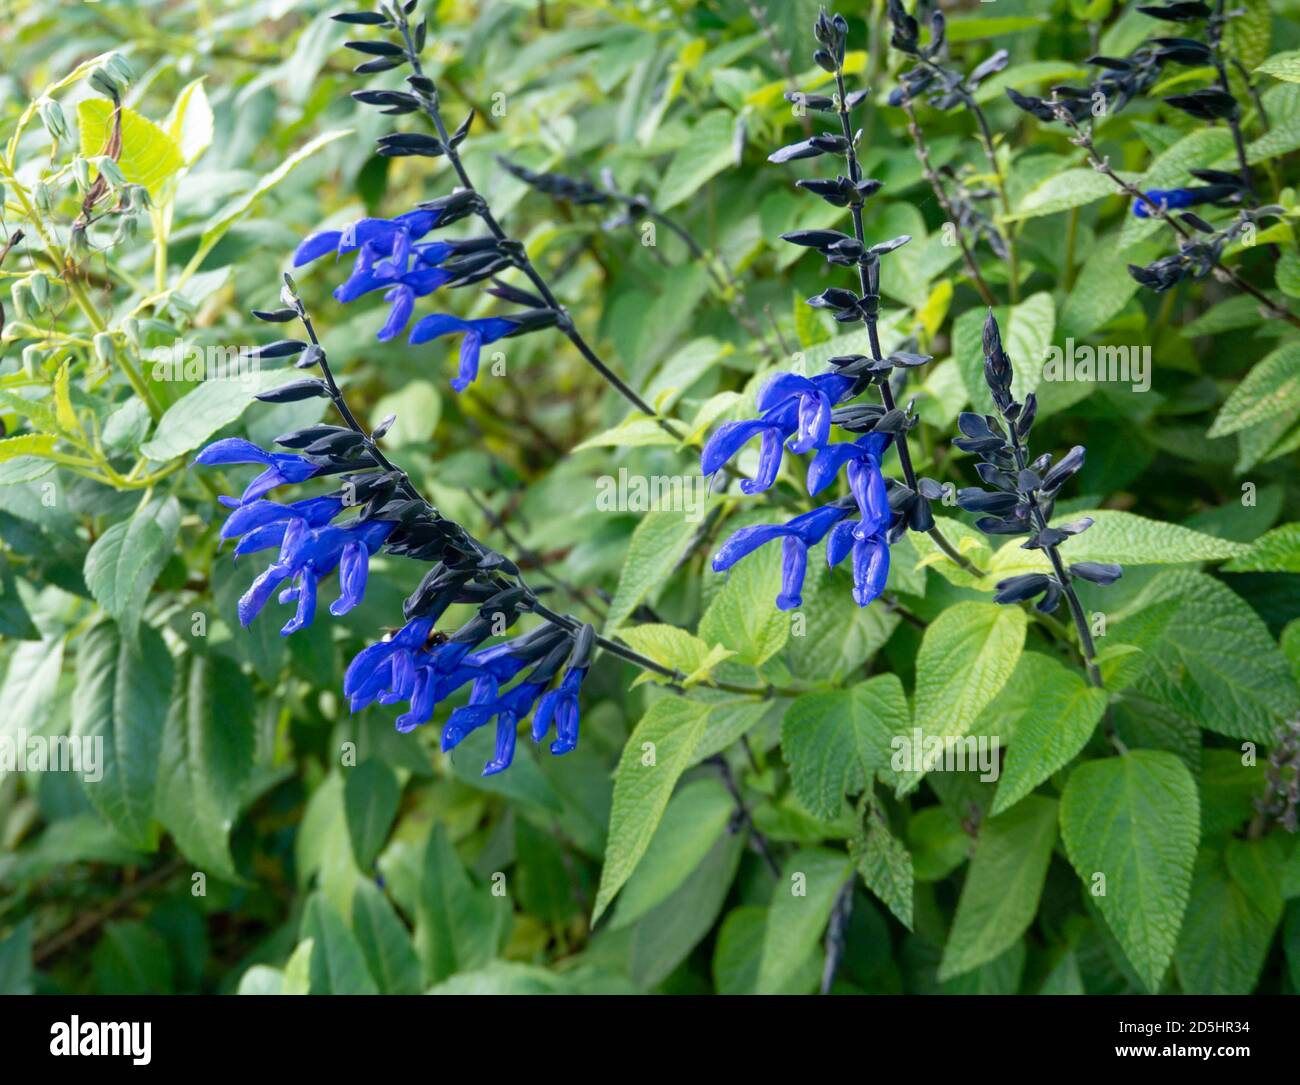 Anise-scented or hummingbird sage plants with bright blue flowers. Salvia guaranitica. Stock Photo